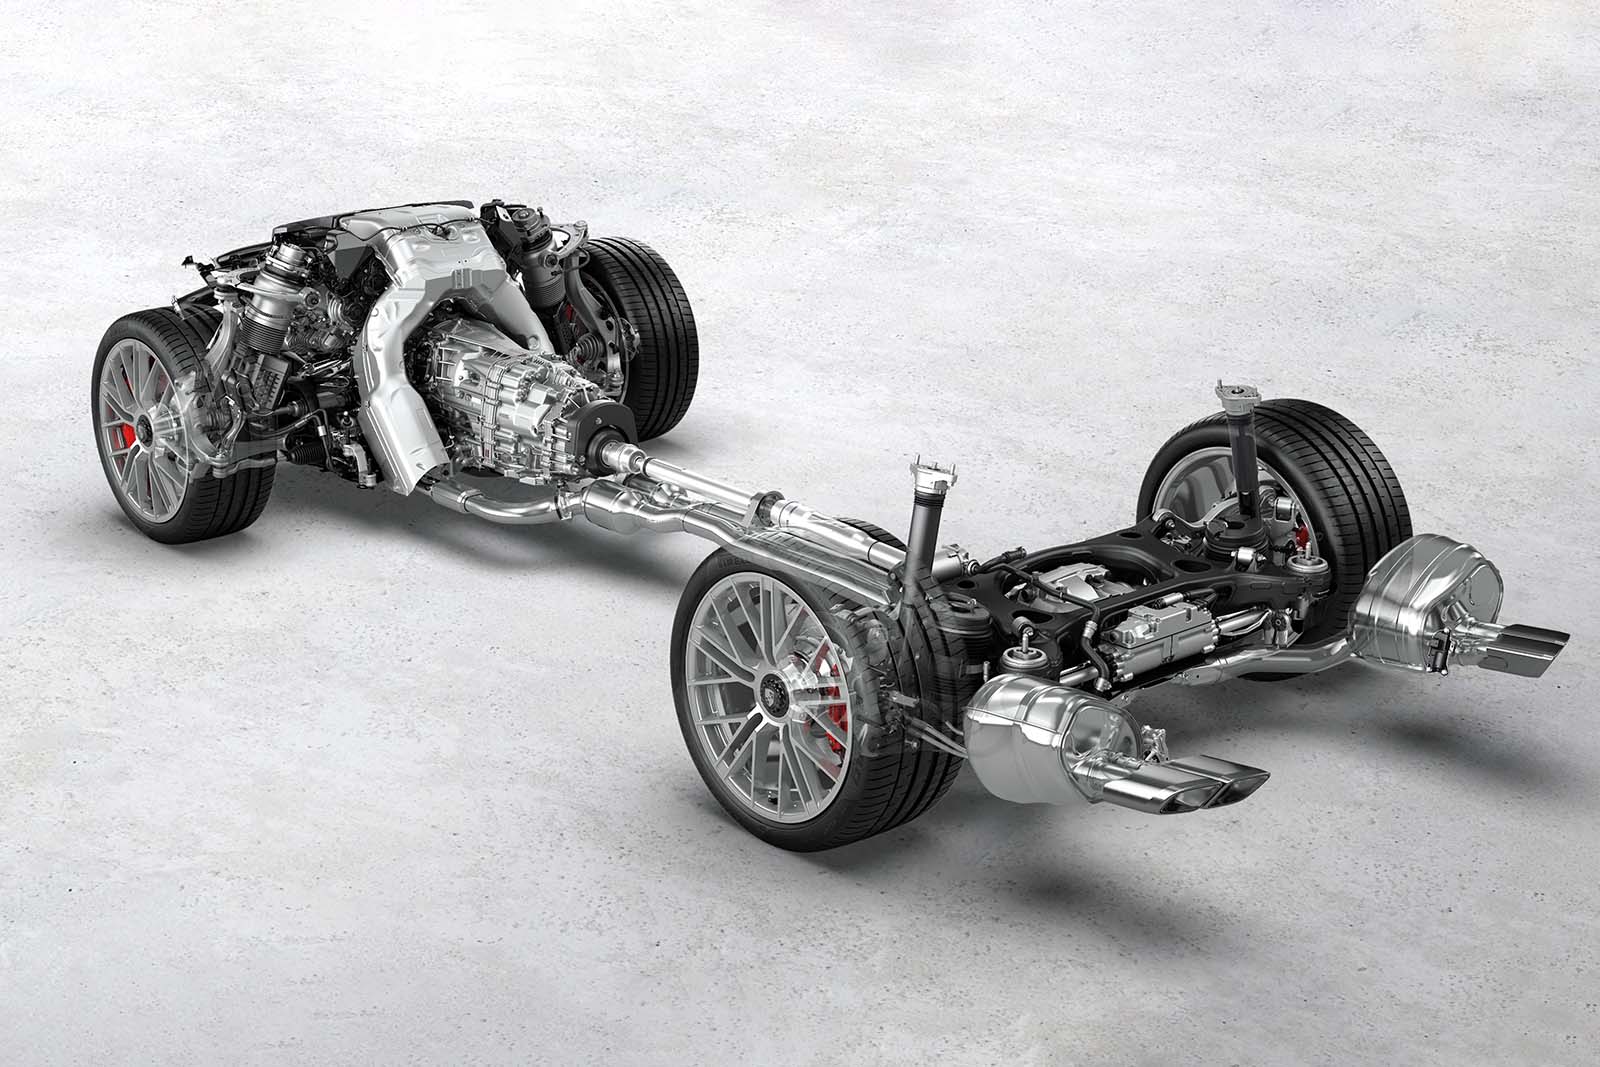 How does Porsche’s Active Ride system work?